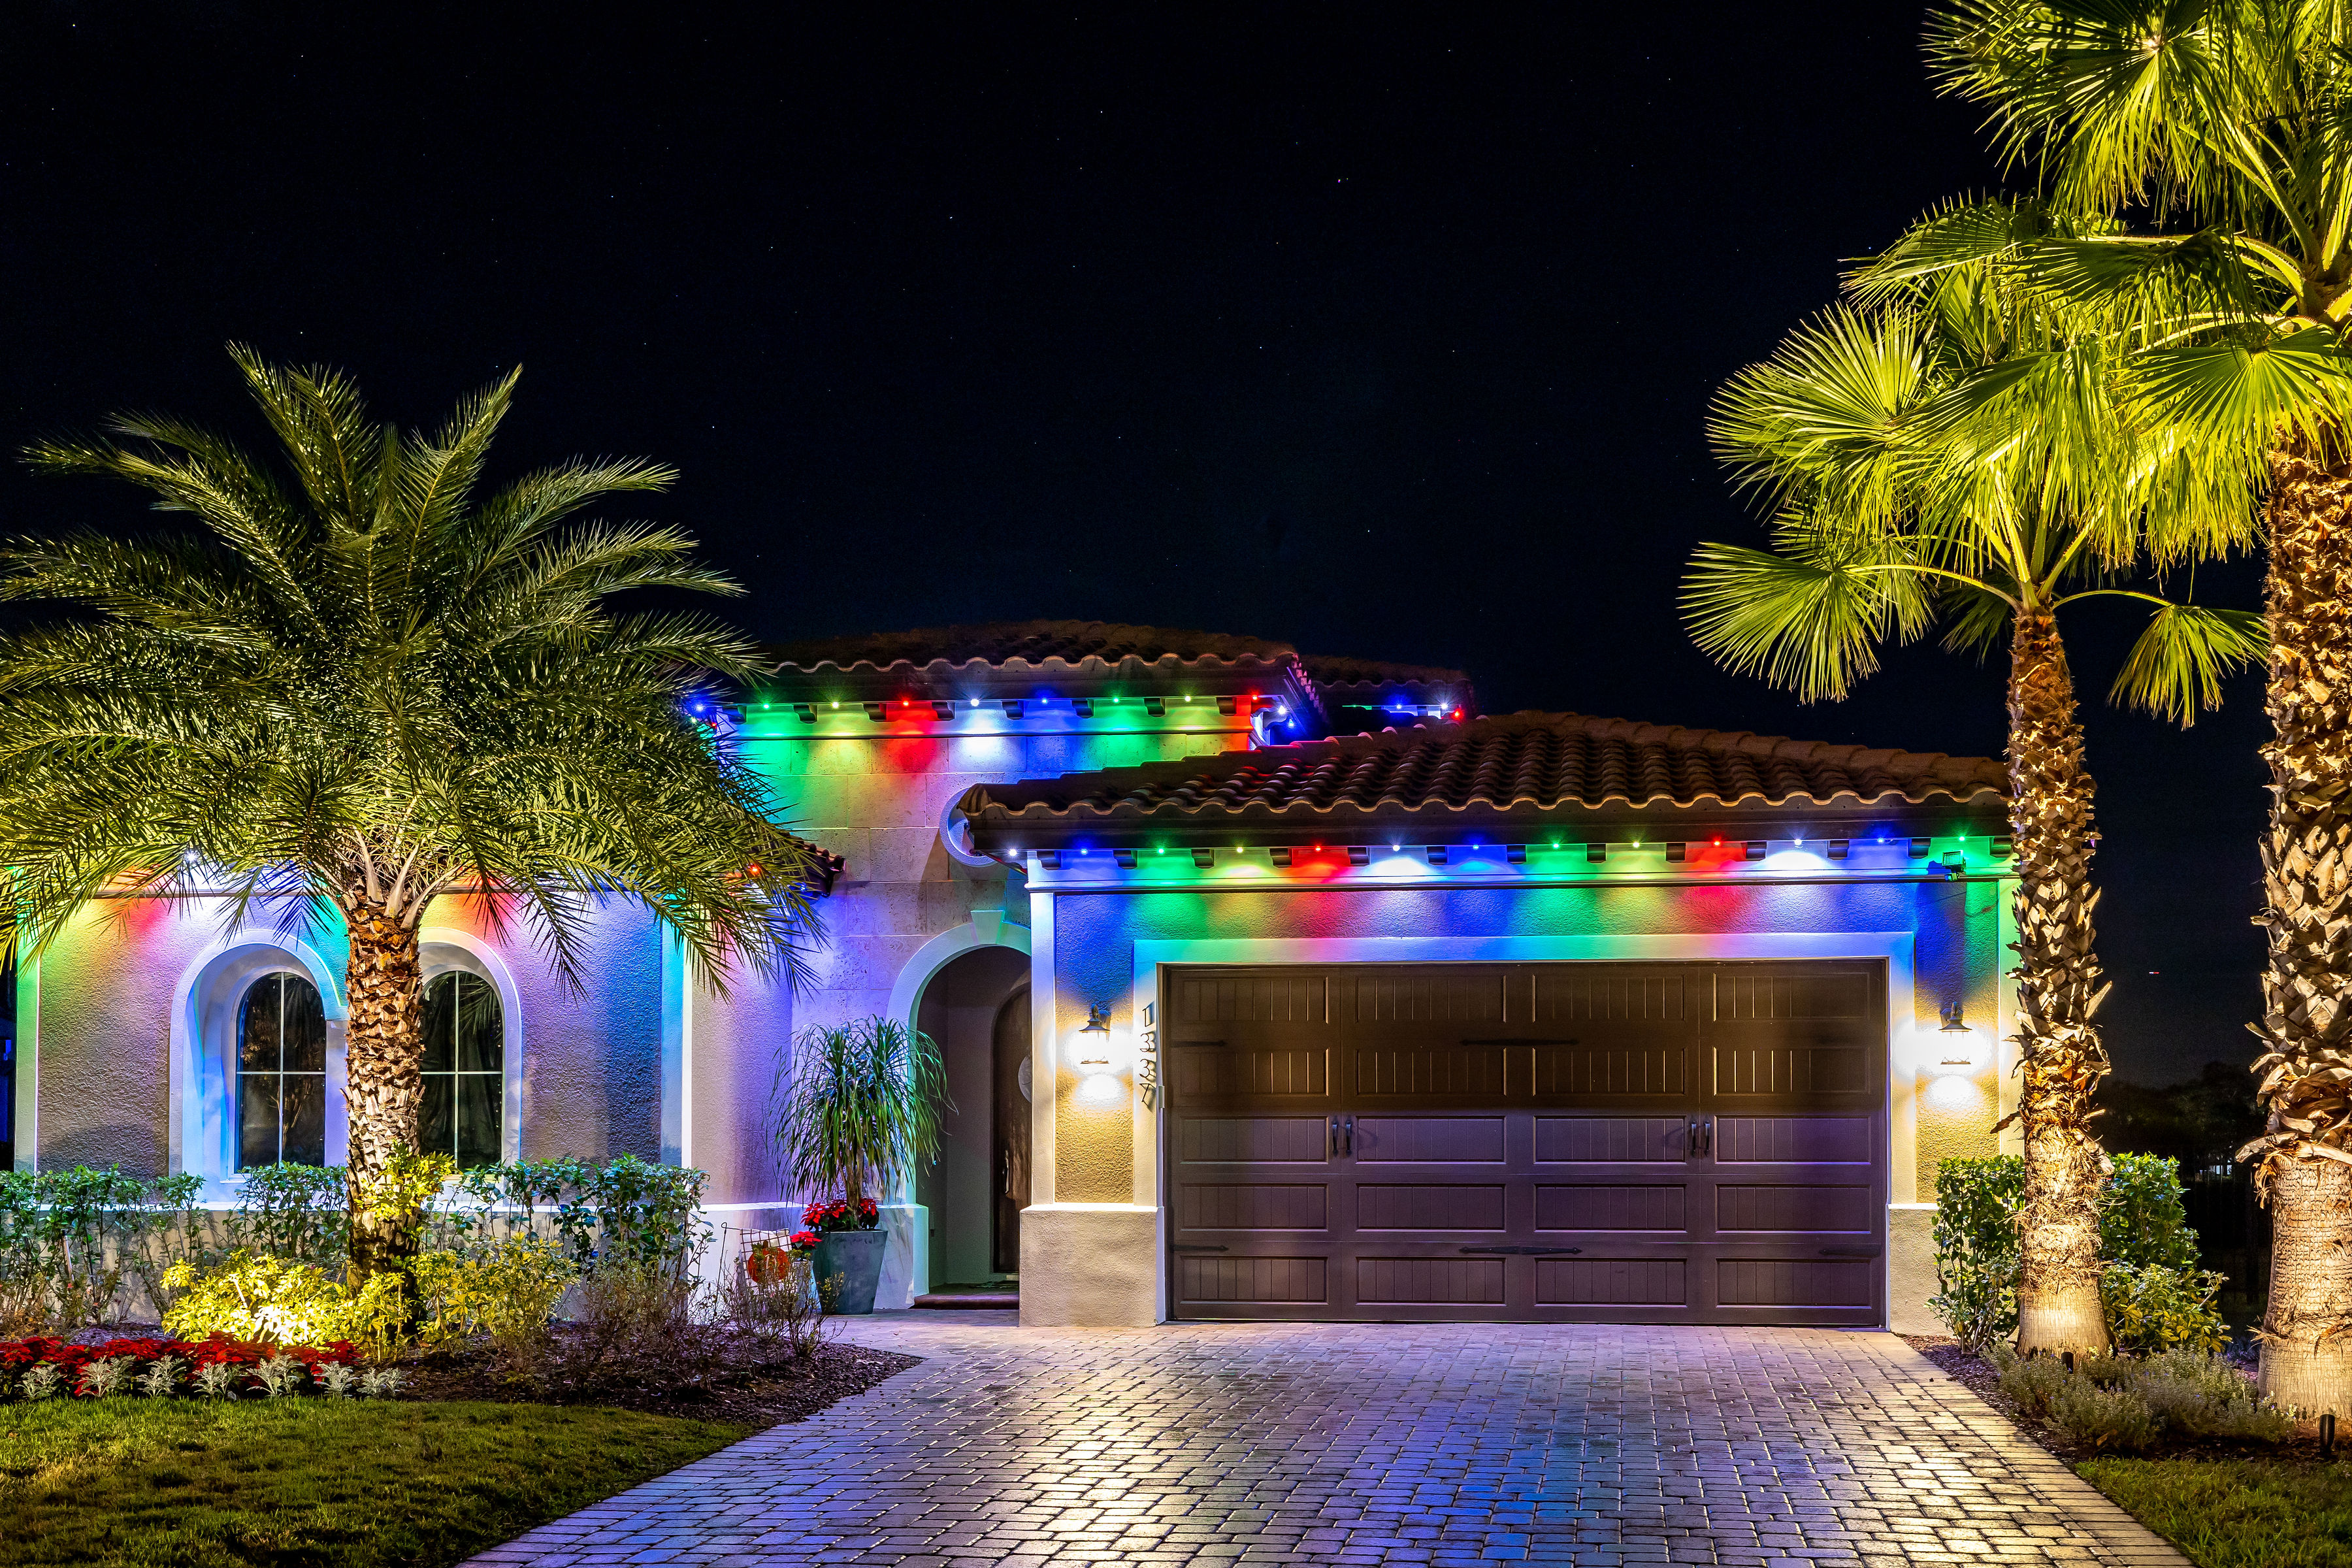 Multicolored permanent roofline lighting on a home